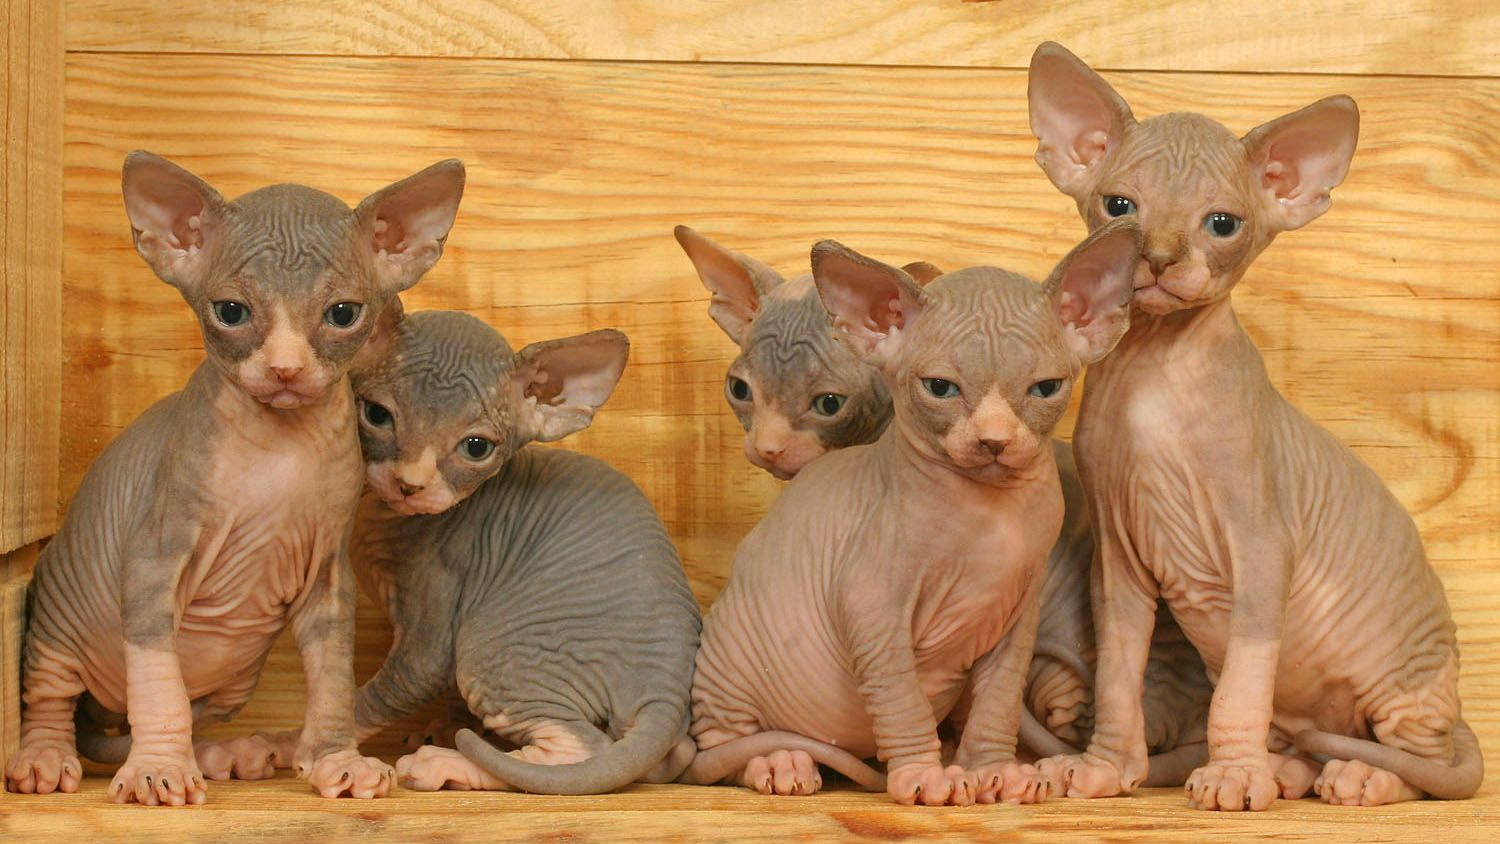 Five Sphynx cat kittens sitting in a wooden crate